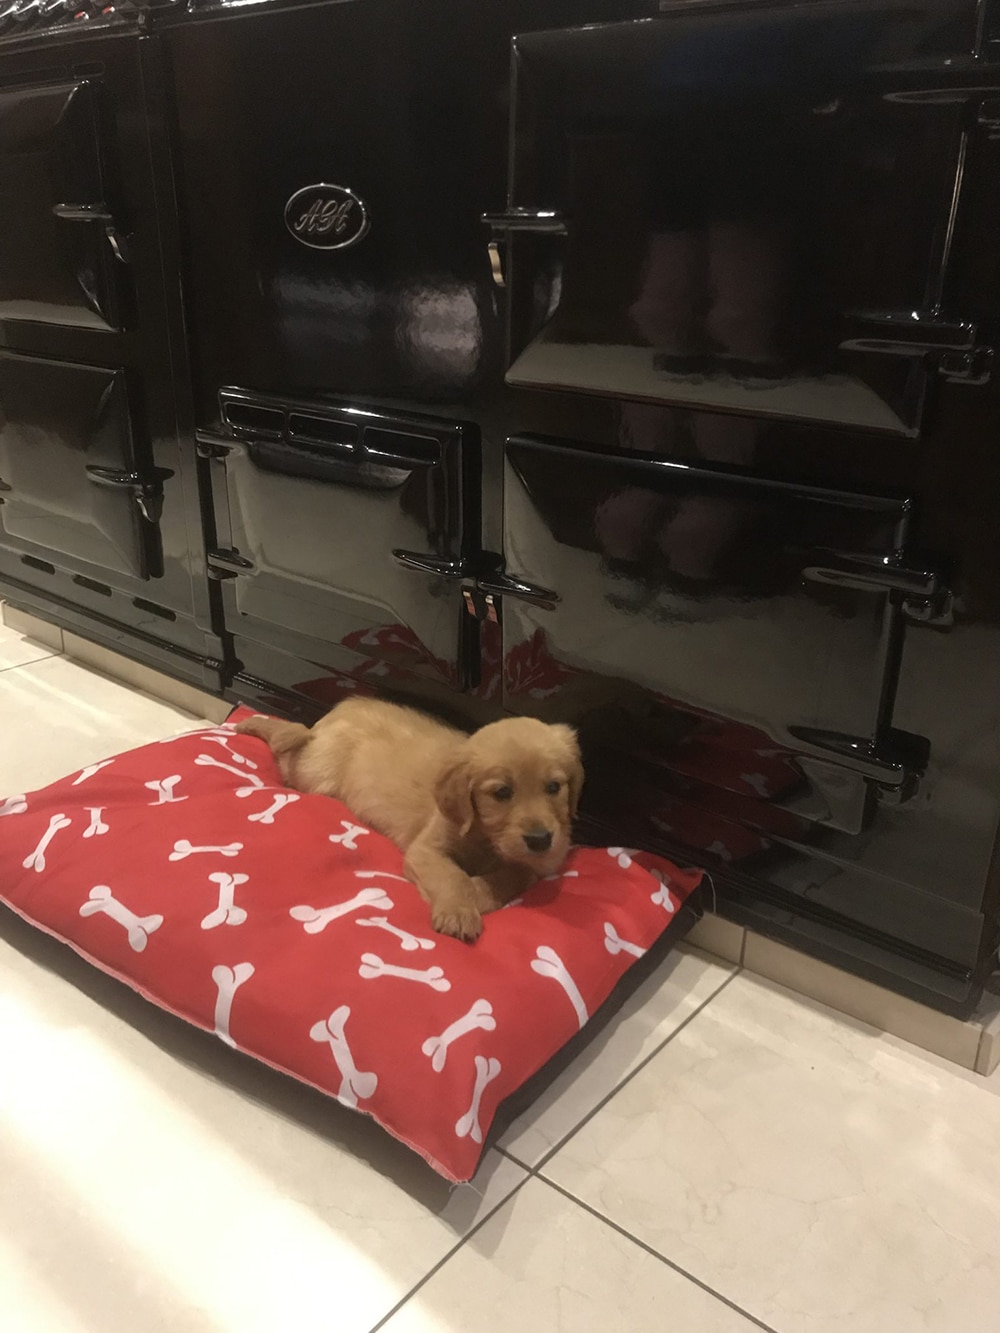 Puppy enjoying the warmth - best dog food for your pet